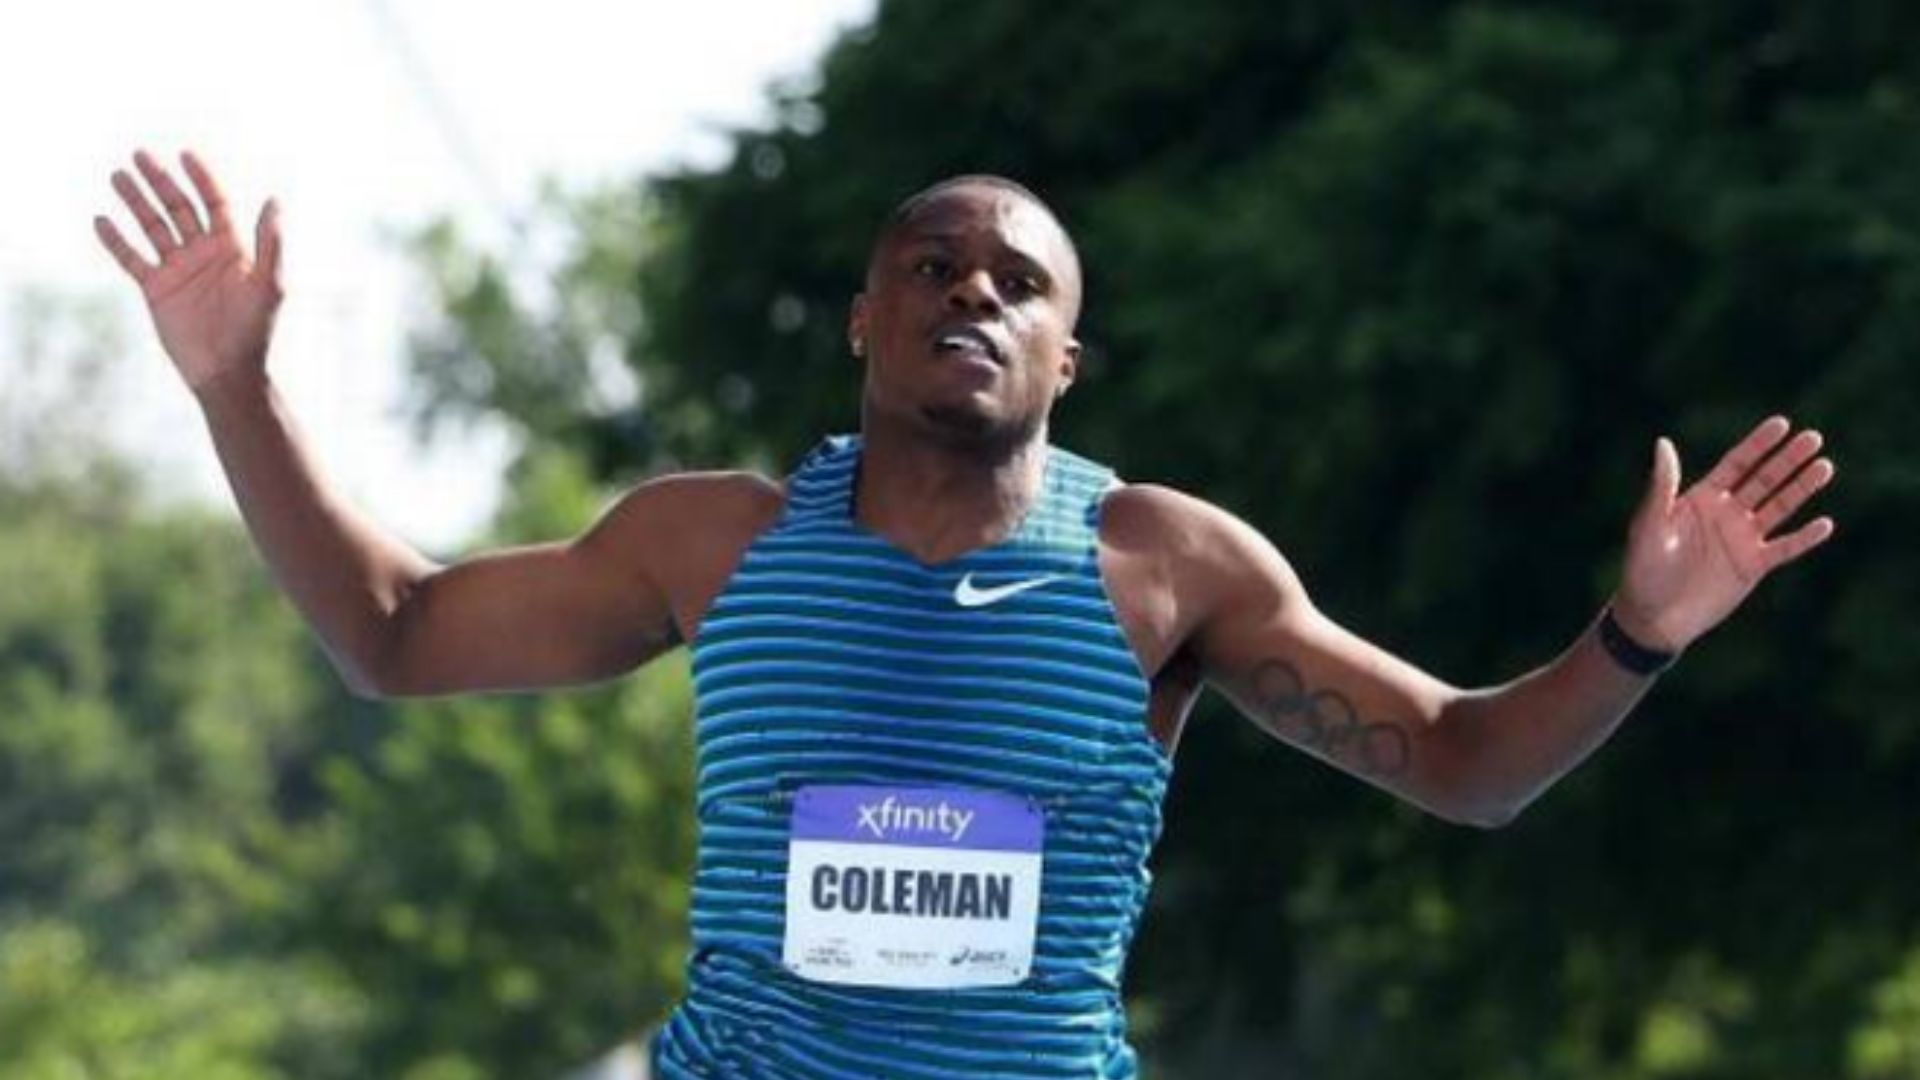 Coleman, Hobbs come out on top in 100m races at NYC Grand Prix